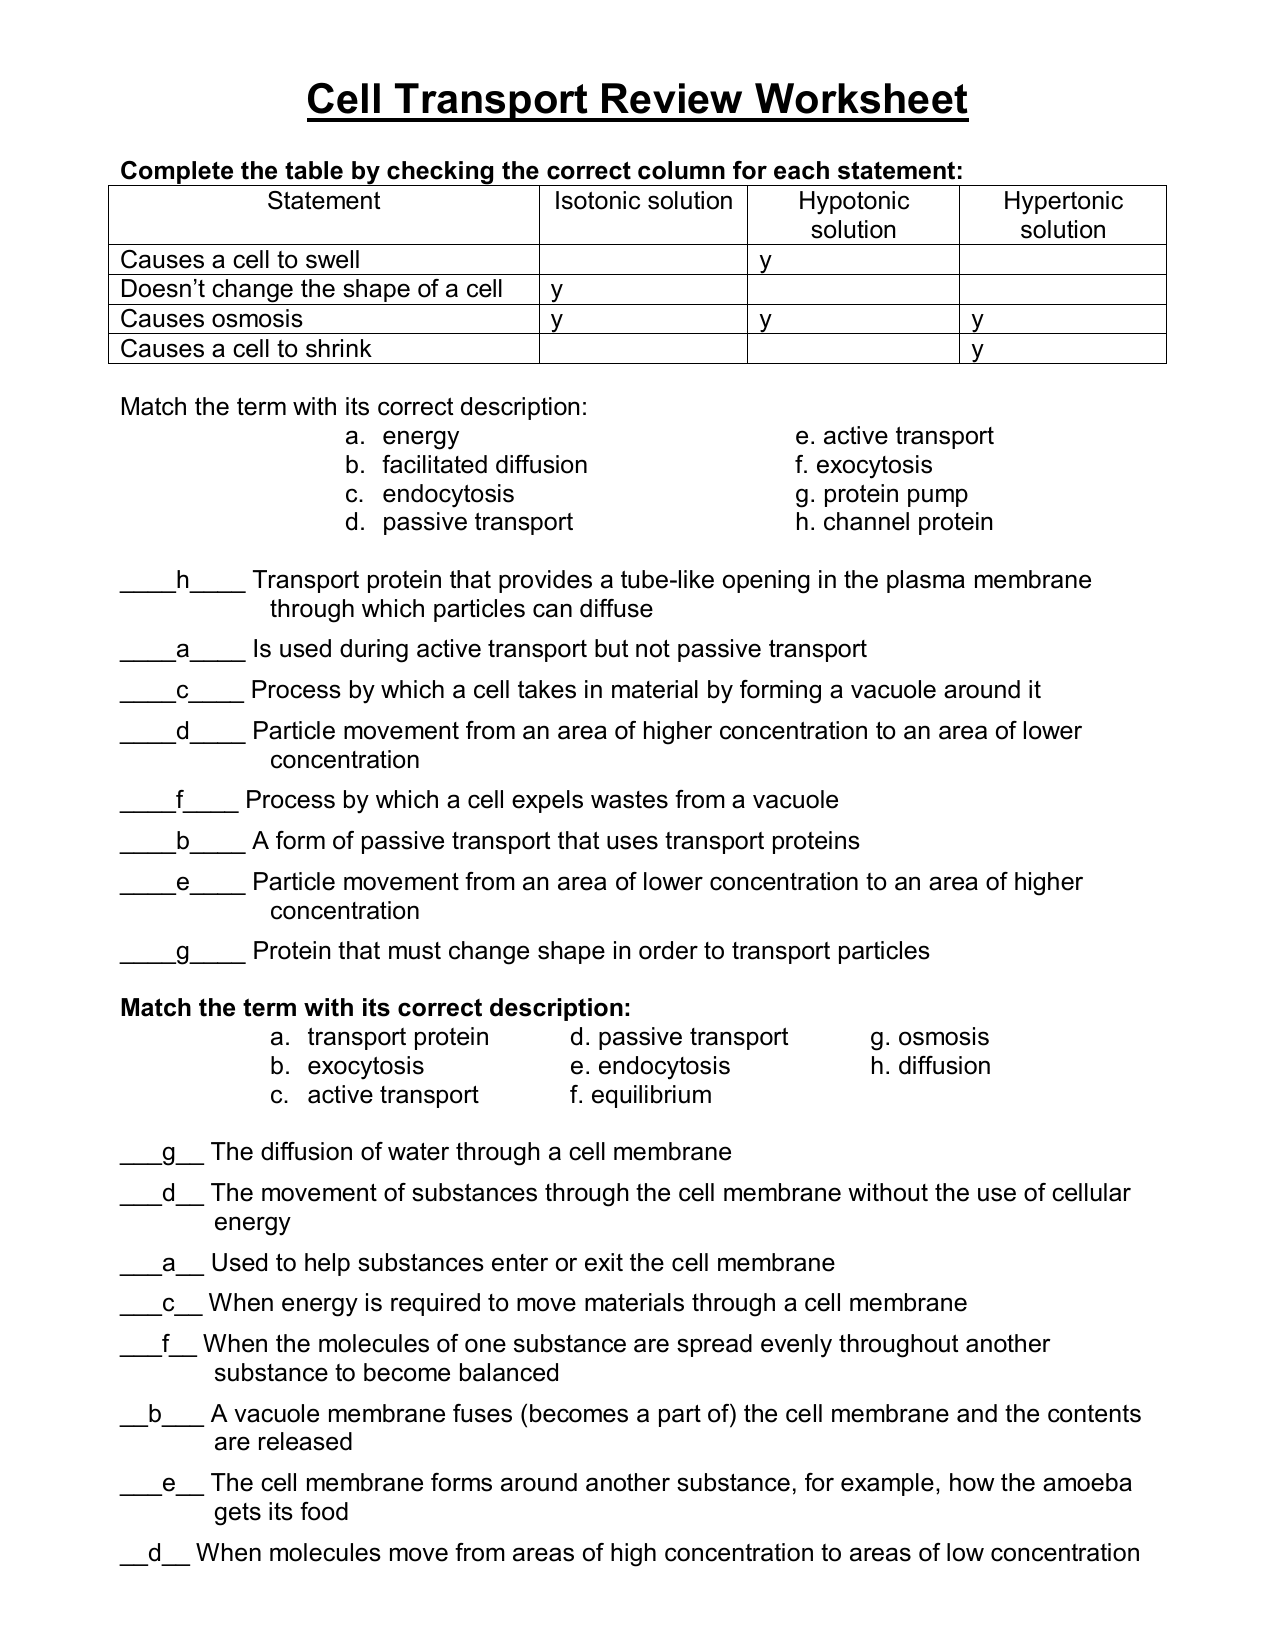 Cell Transport Review Answers For Cell Transport Worksheet Answers